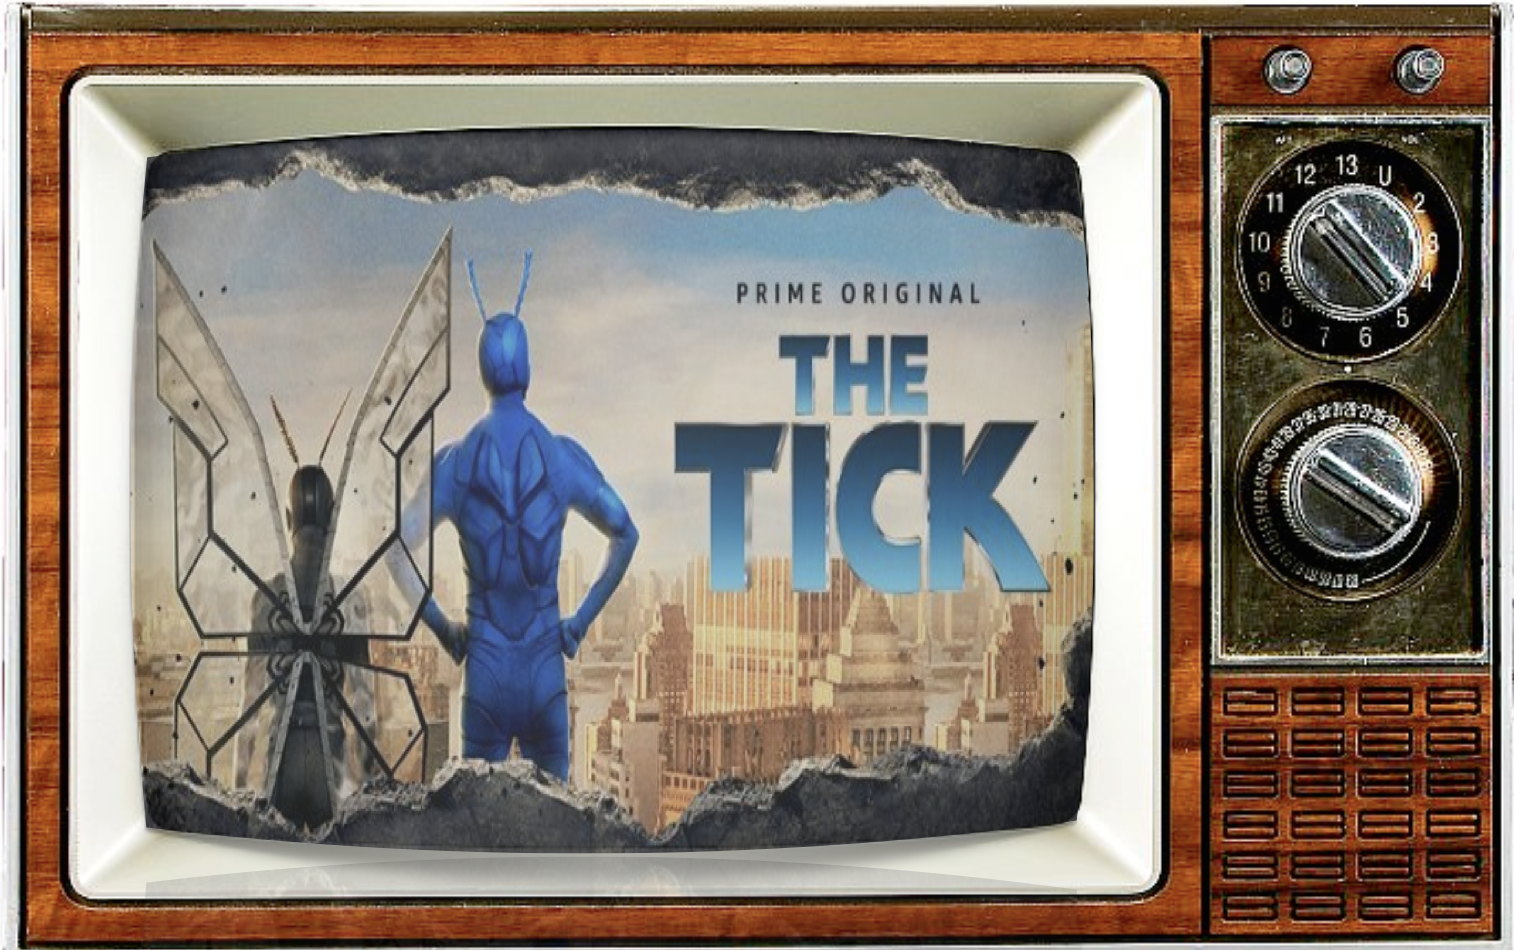 SMC Episode 80: THE TICK, A Hero Will Land Again! With Peter Serafinowicz and Griffin Newman